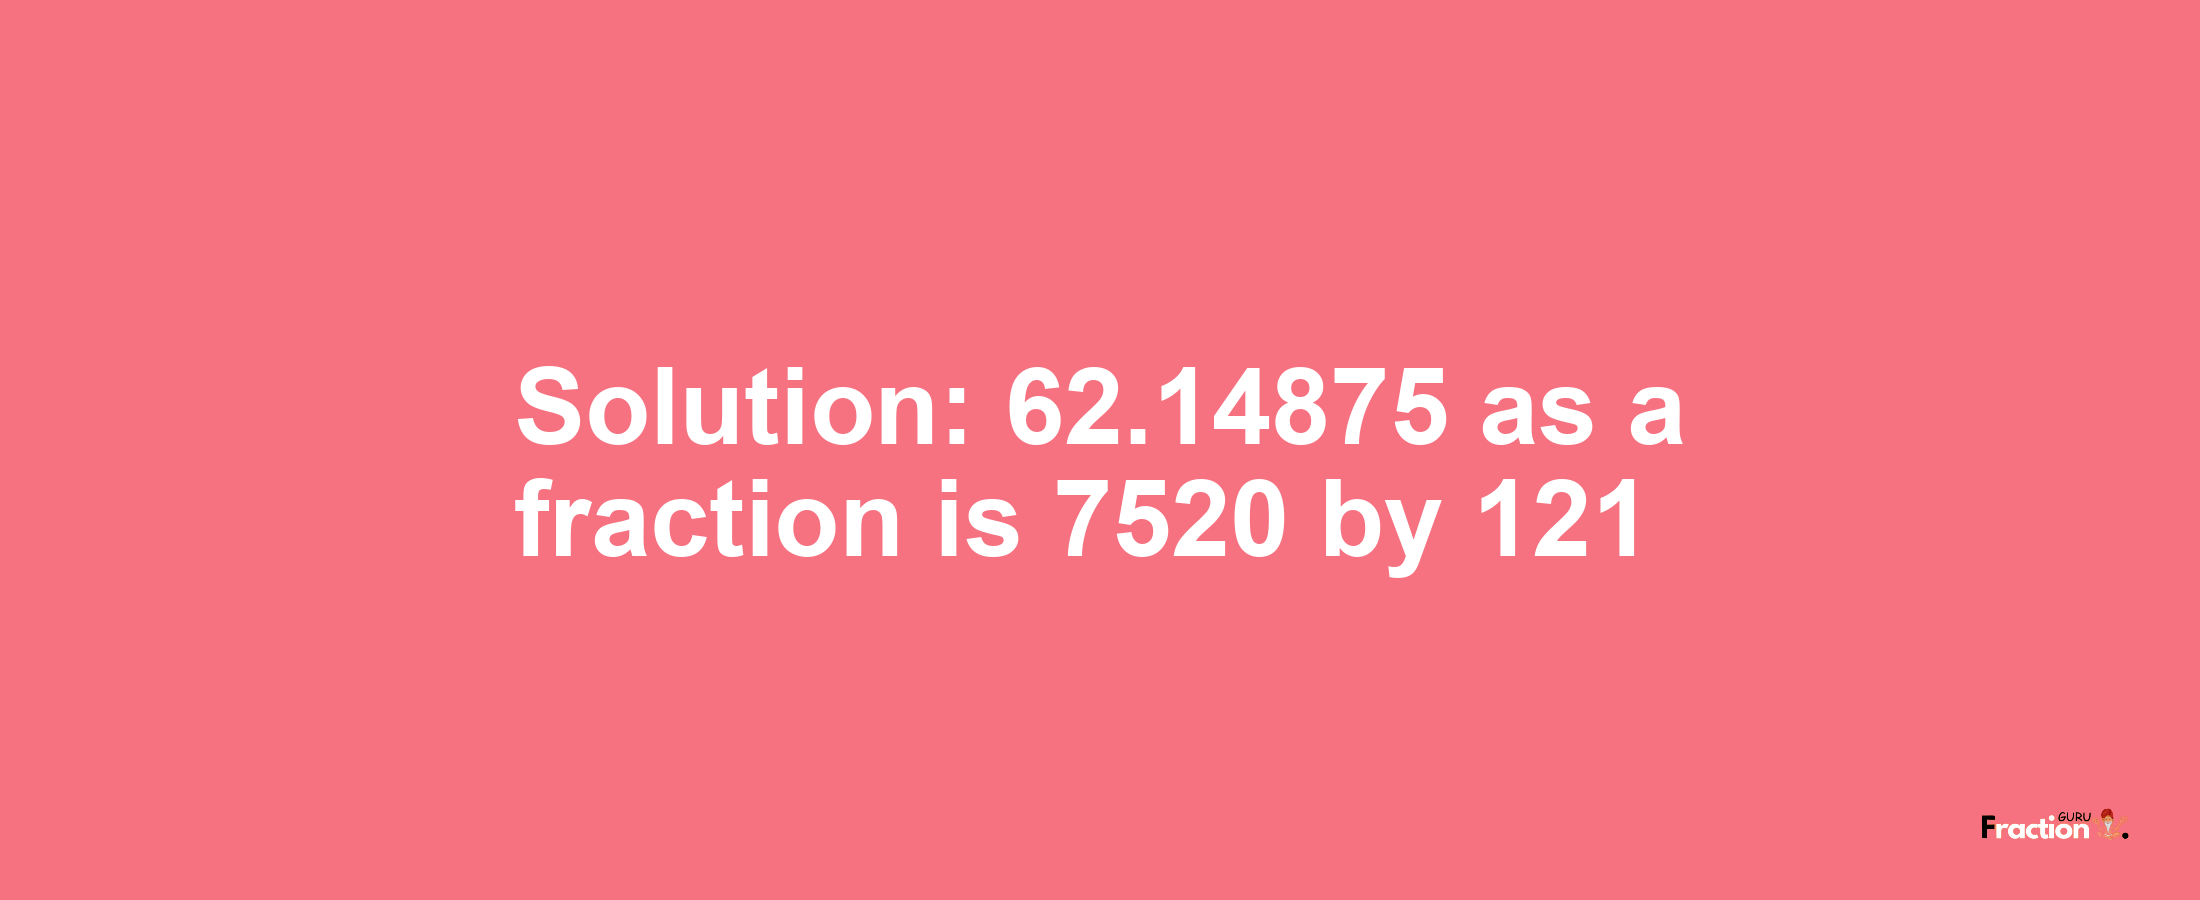 Solution:62.14875 as a fraction is 7520/121